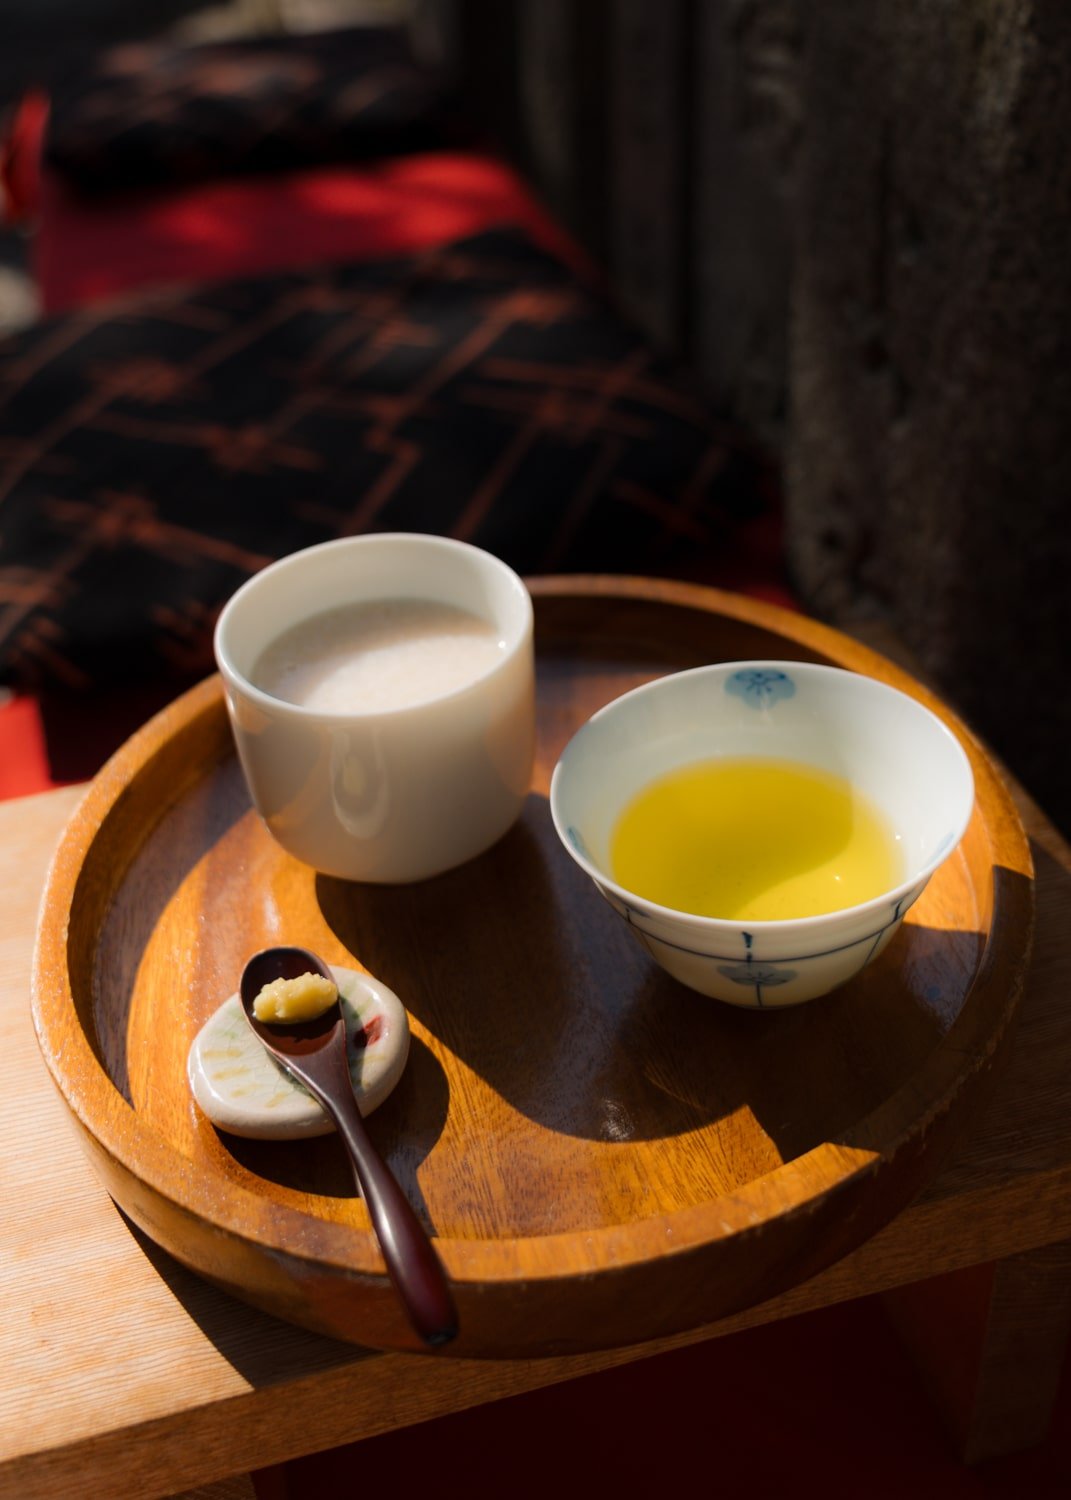 Amazake and green tea with a spoon of minced ginger, on a round wooden platter at Fushimi Inari Shrine in Kyoto, Japan.